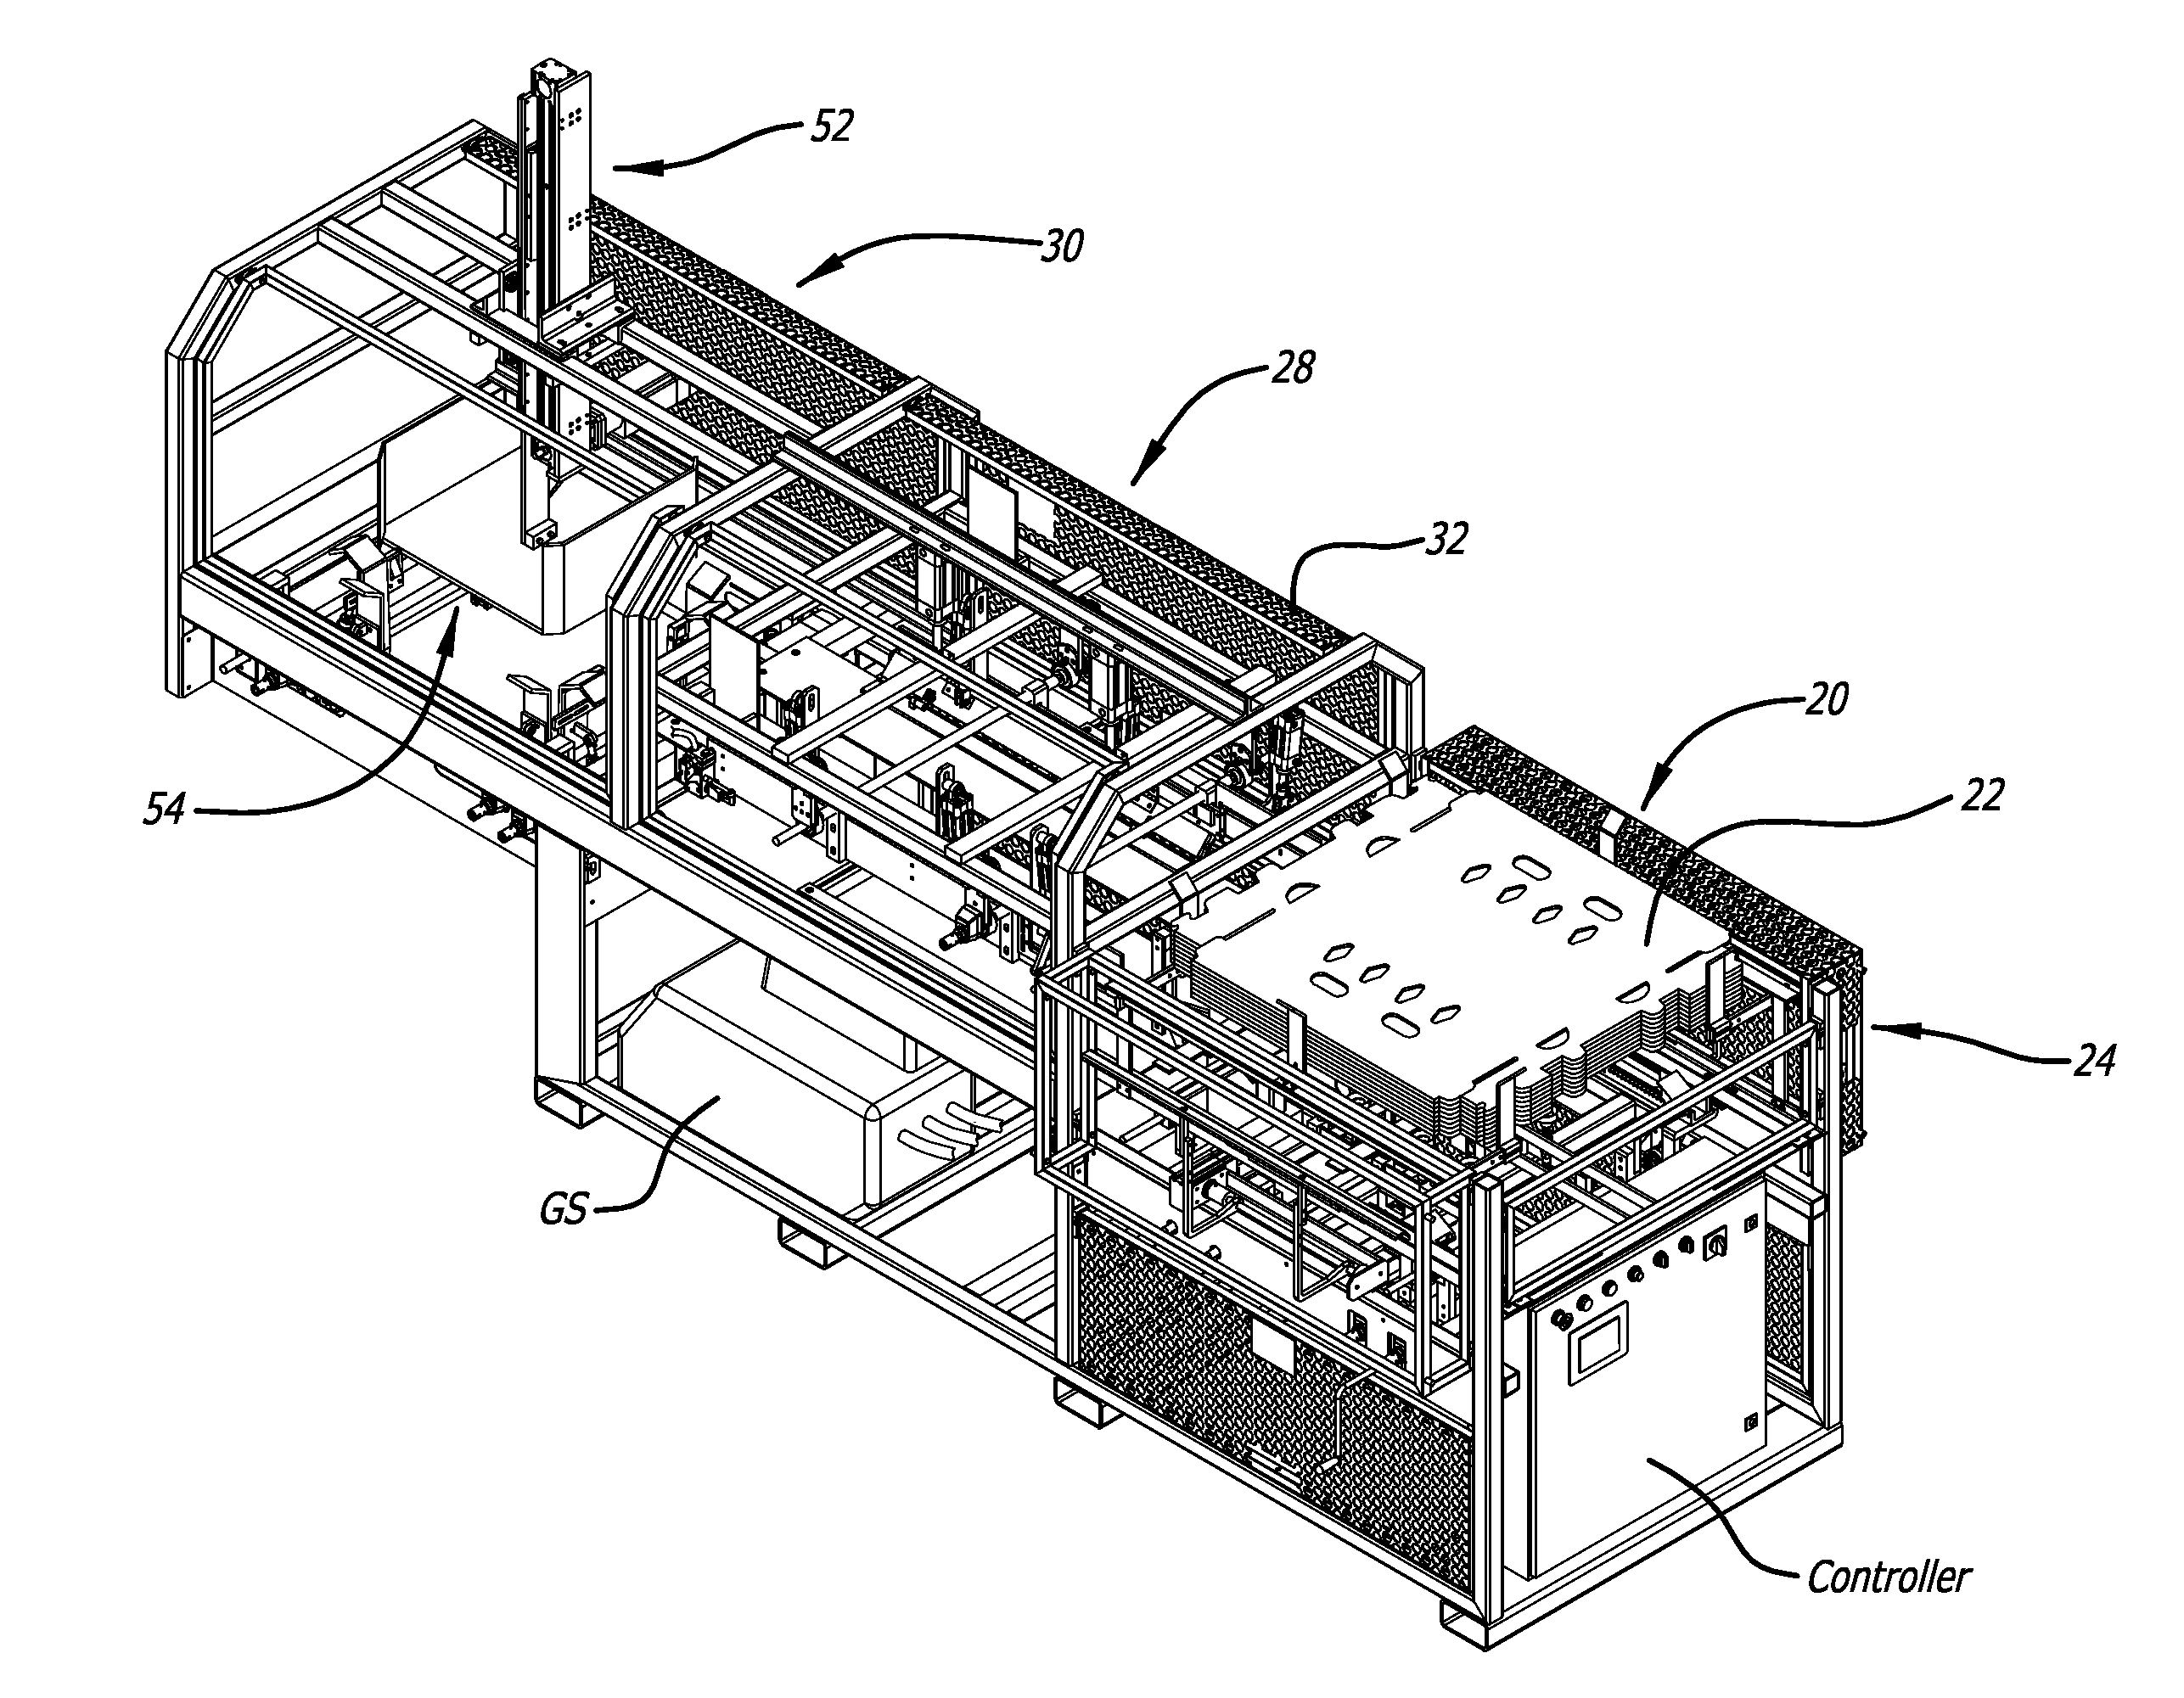 Apparatus and methods for folding paper boxes